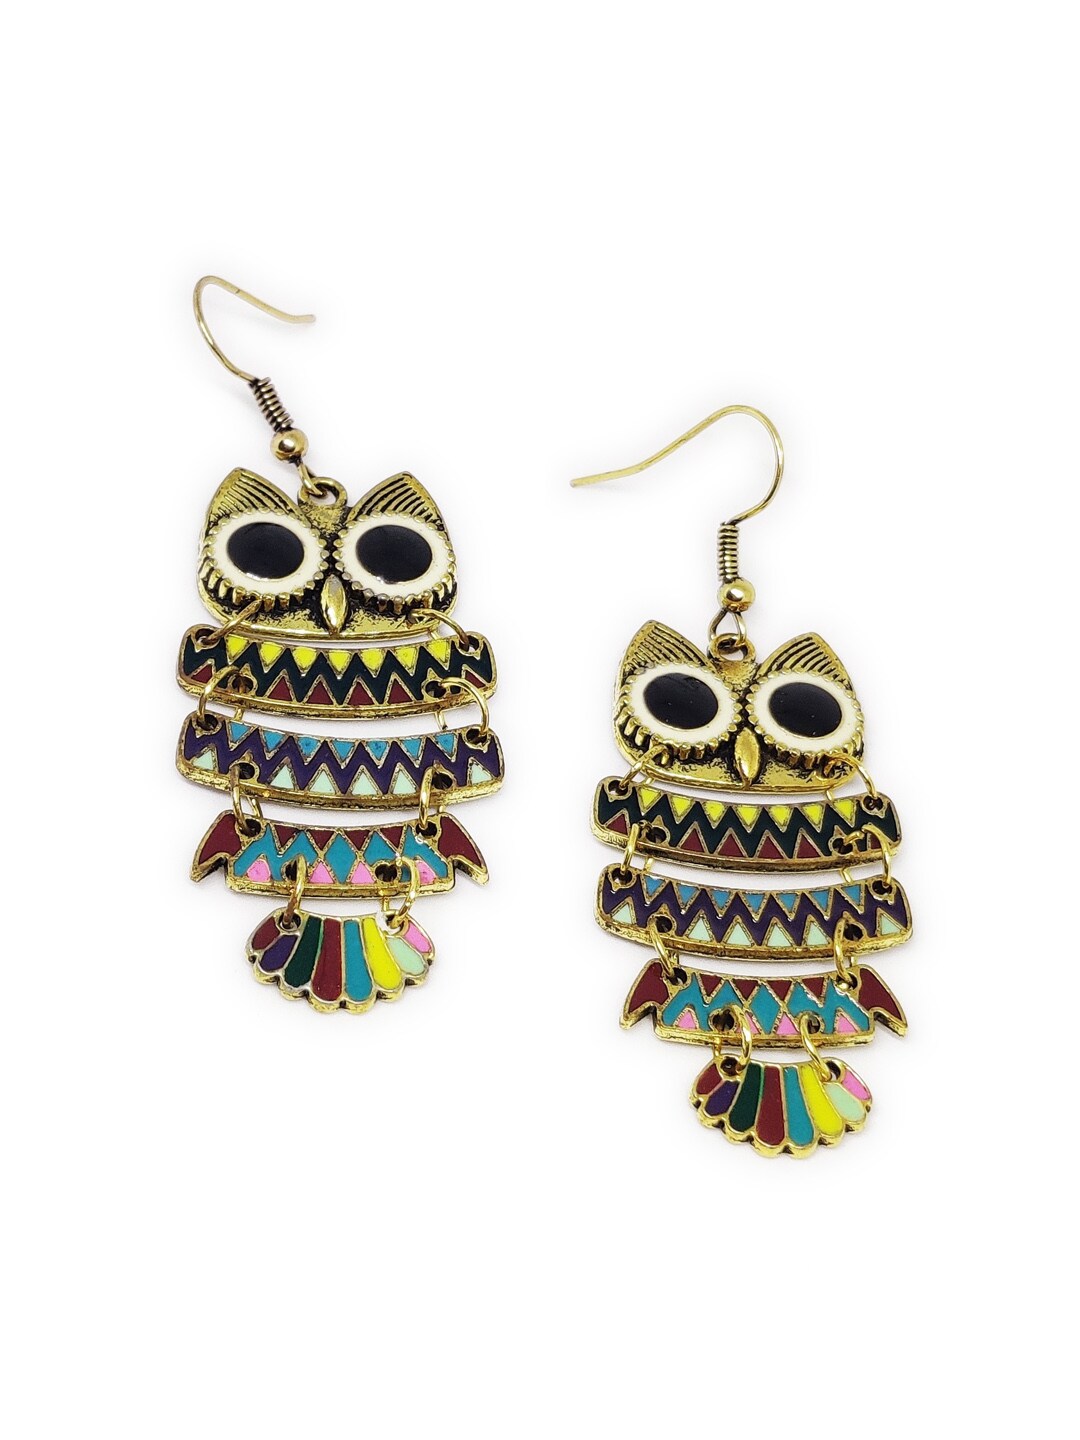 EL REGALO Gold-Toned & Black Quirky Drop Earrings - for Women and Girls
Style ID: 16770282